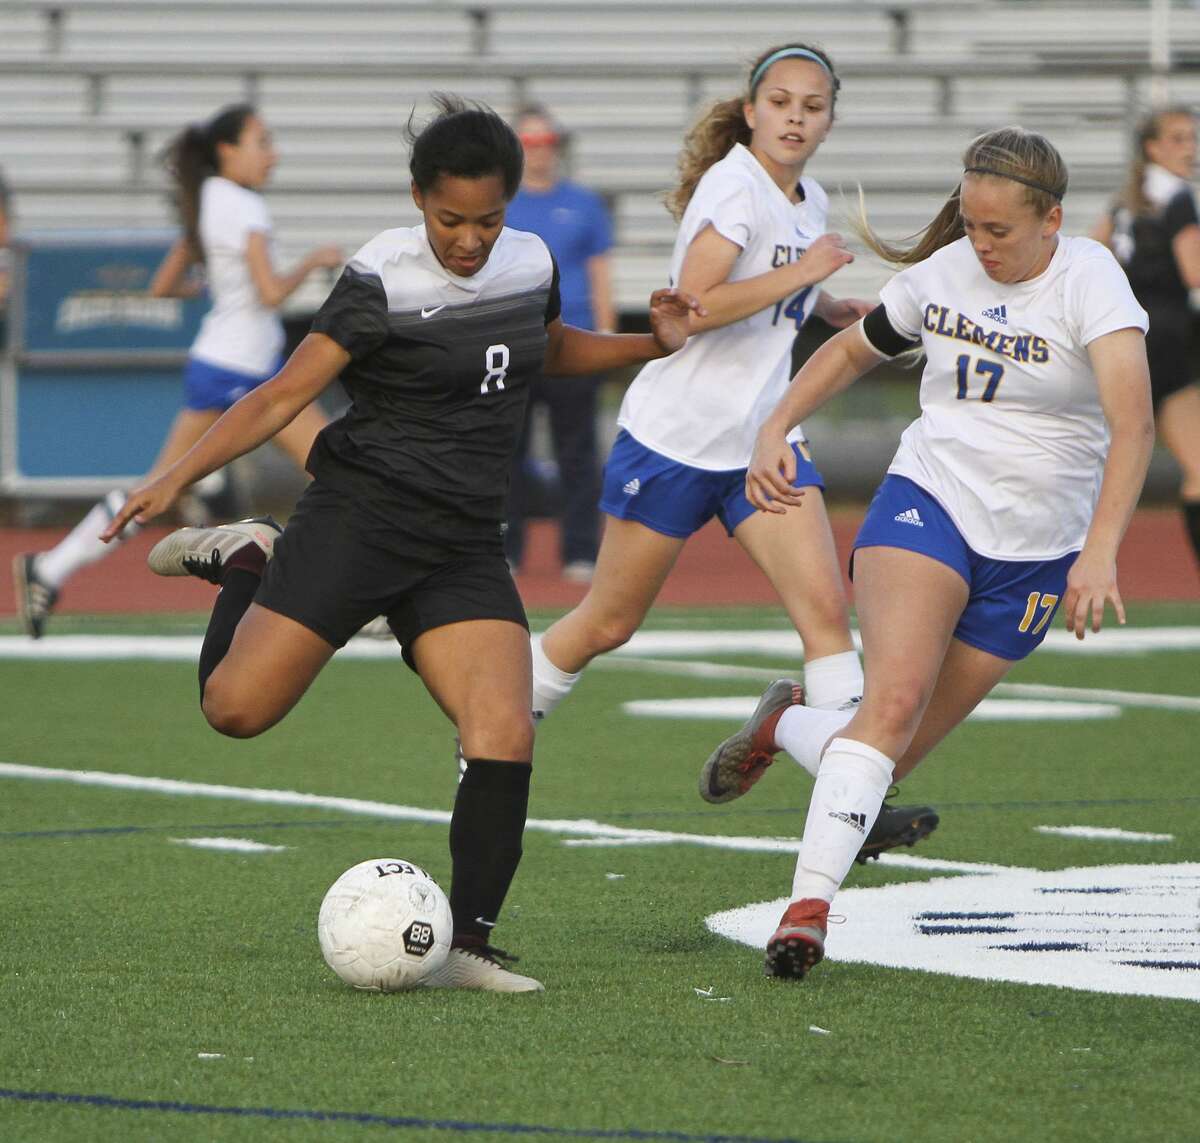 Steele's Ariana Nelson (8) prepares to send the ball downfield past Clemens' Emily Newton (17) and Alex Rudd (14) during Steele's 2-1 win Friday at Lehnhoff Stadium.